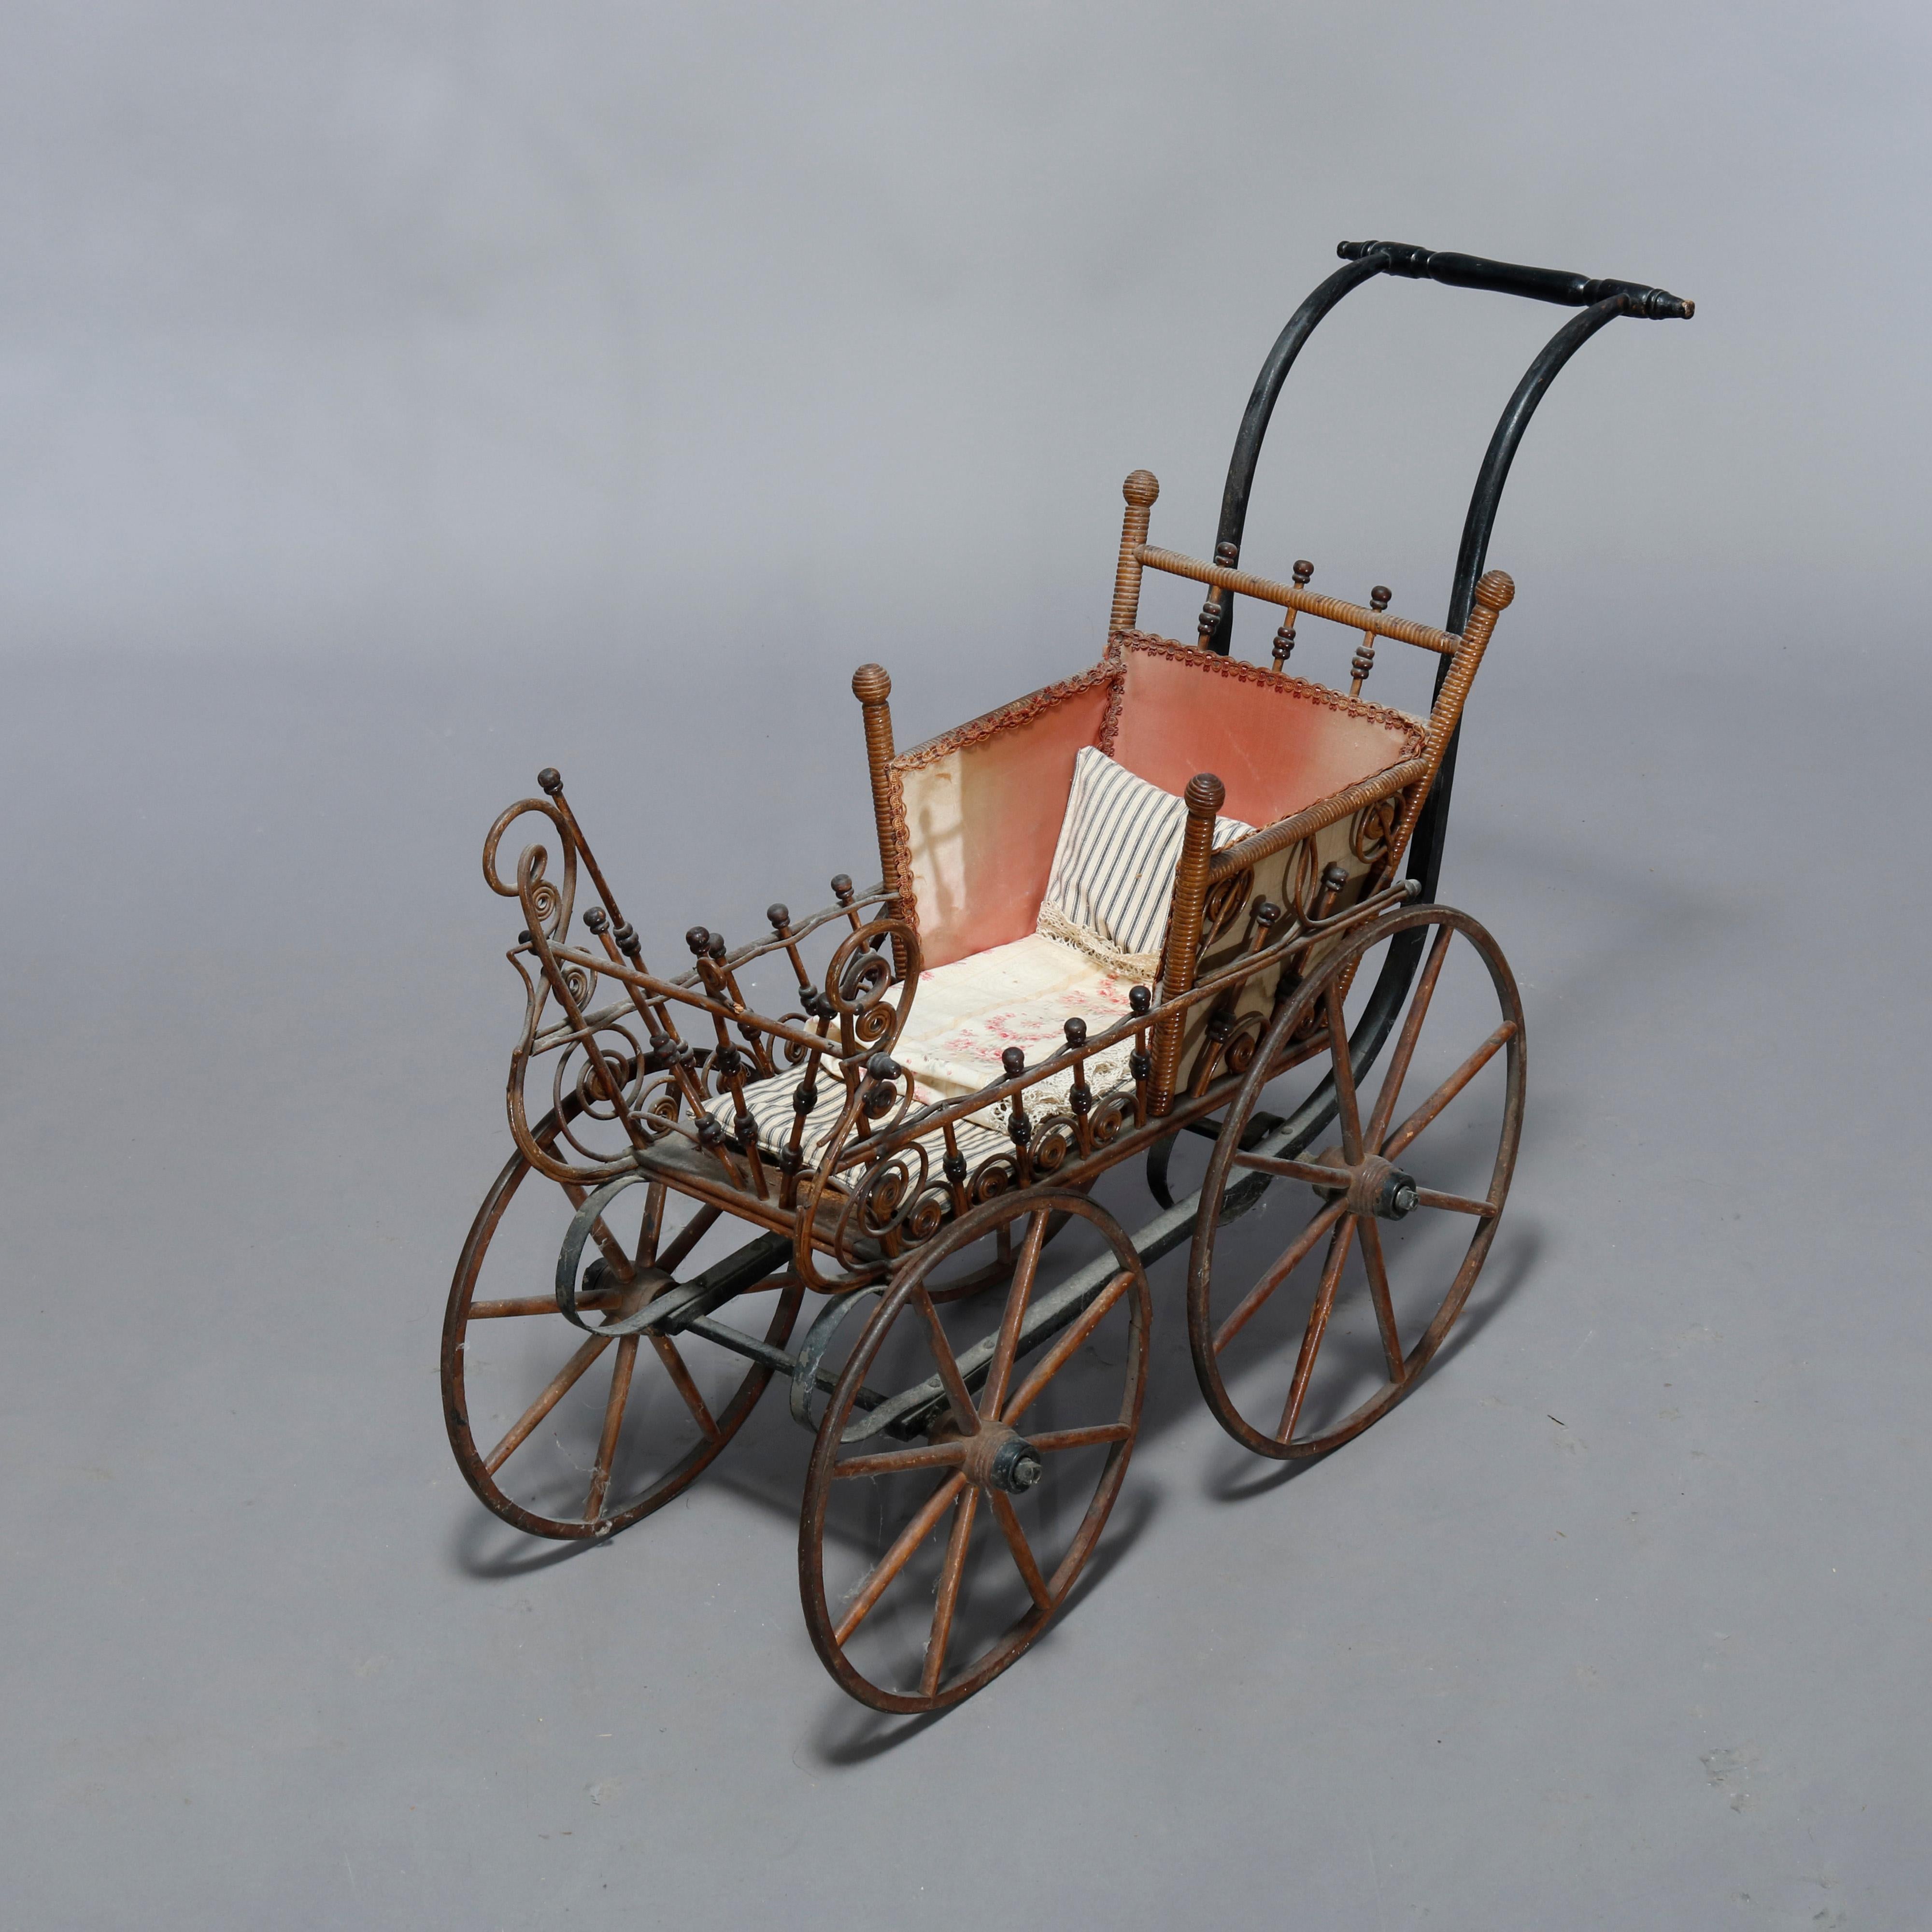 An antique Victorian baby buggy in the manner of Heywood Wakefield offers stick and ball wicker construction, circa 1890

Measures: 28.5